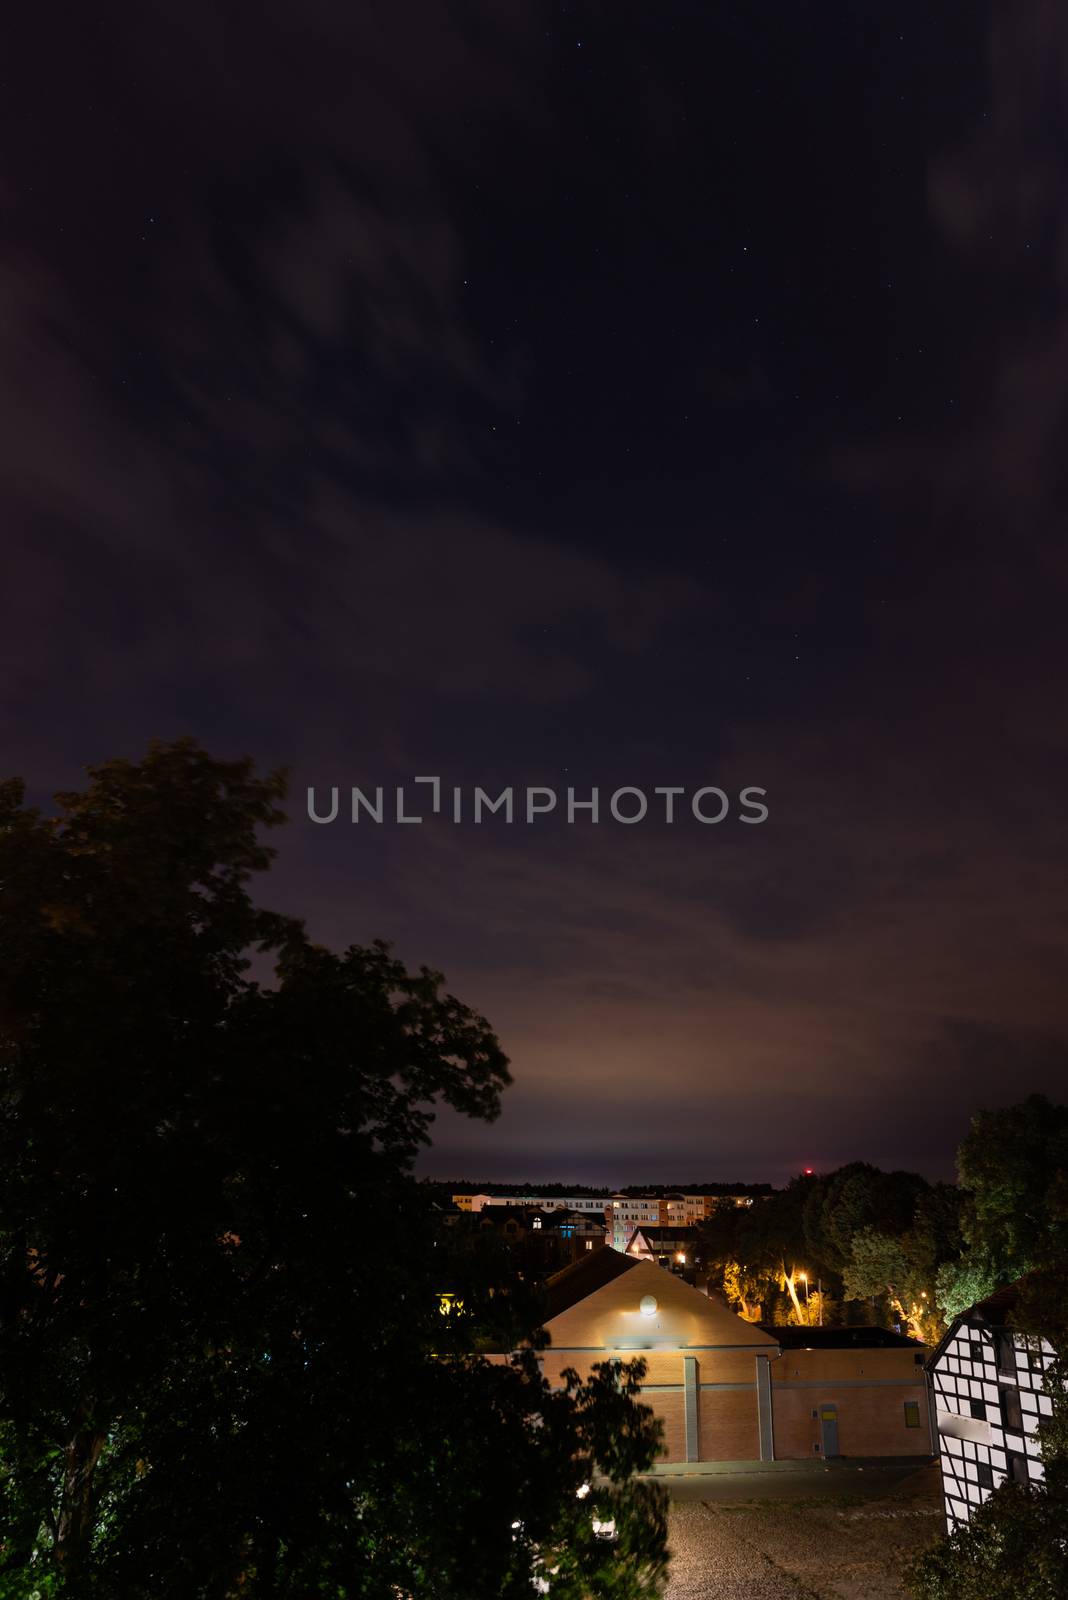 Szczecin. Night view from across the river to the illuminated hi by Brejeq